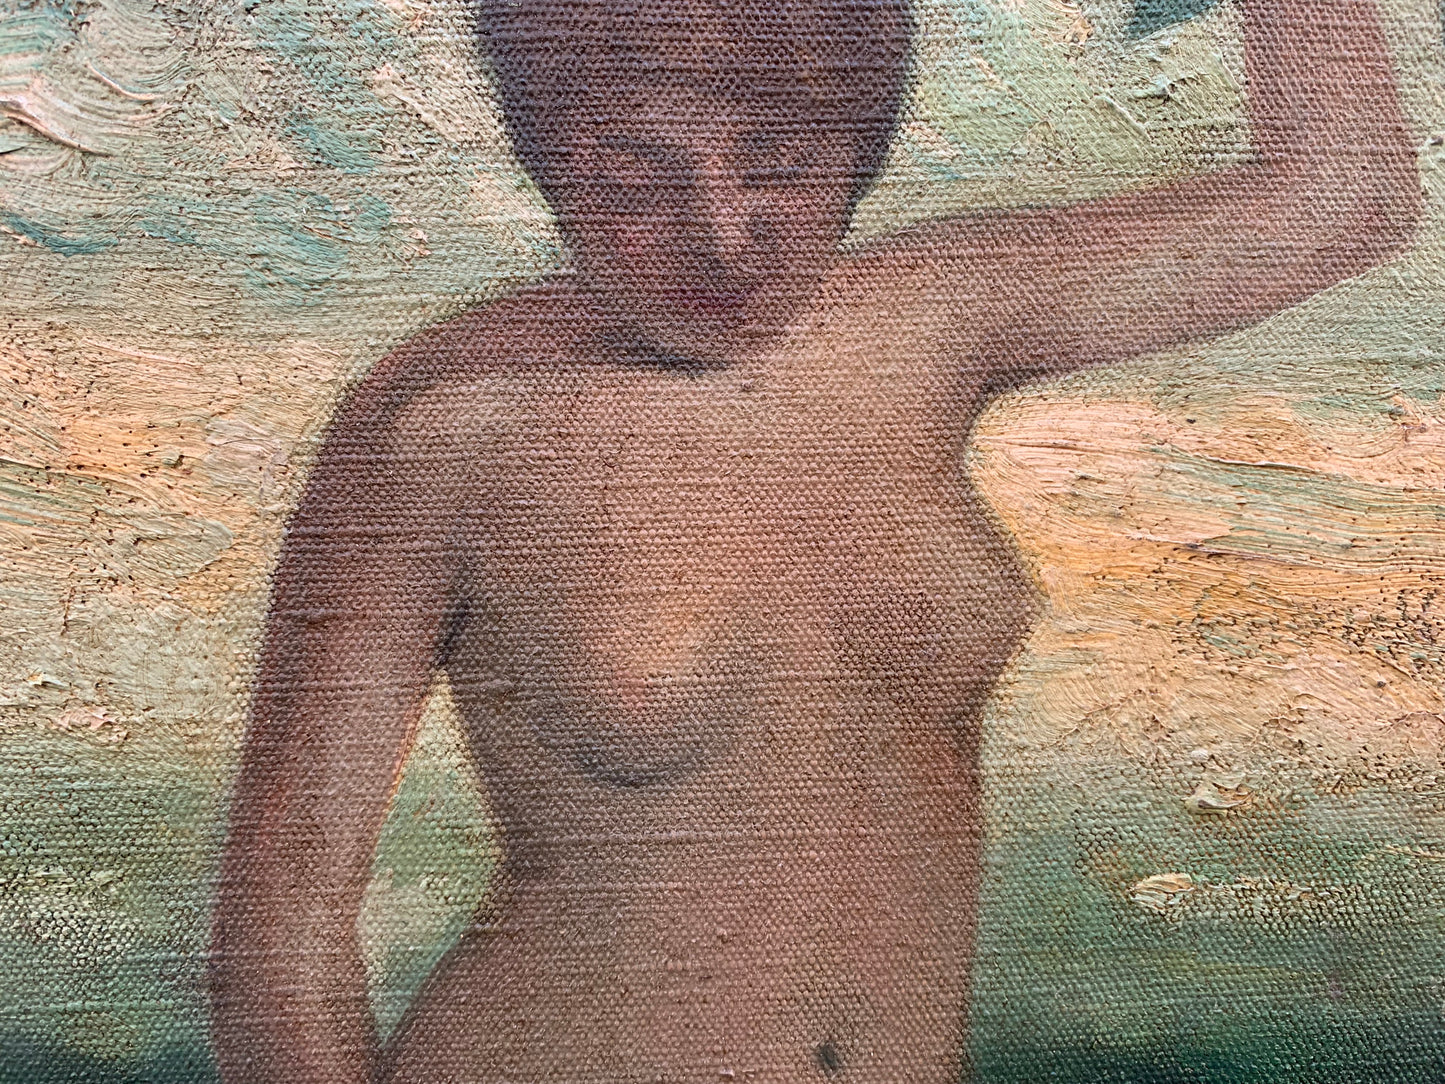 Symbolist painting.  "The nude of a woman" around 1890.